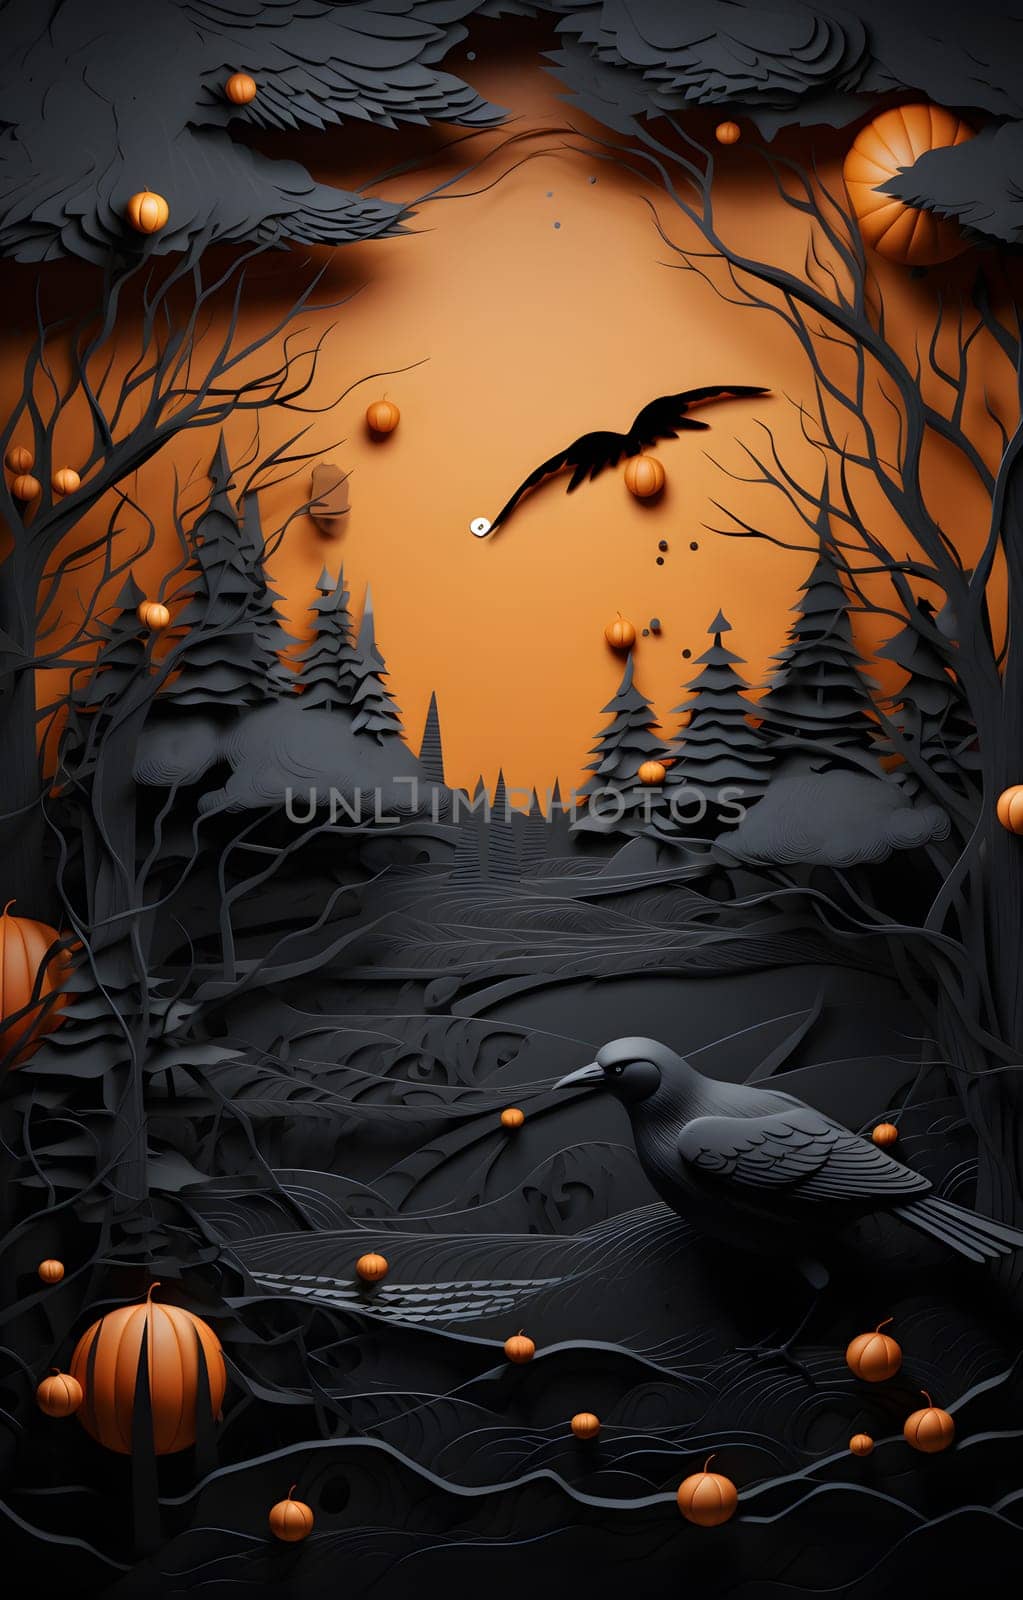 Midnight Symphony: A Marvelous Papercut of a Raven Guiding Pumpkins Across a Moonlit Night by Nadtochiy